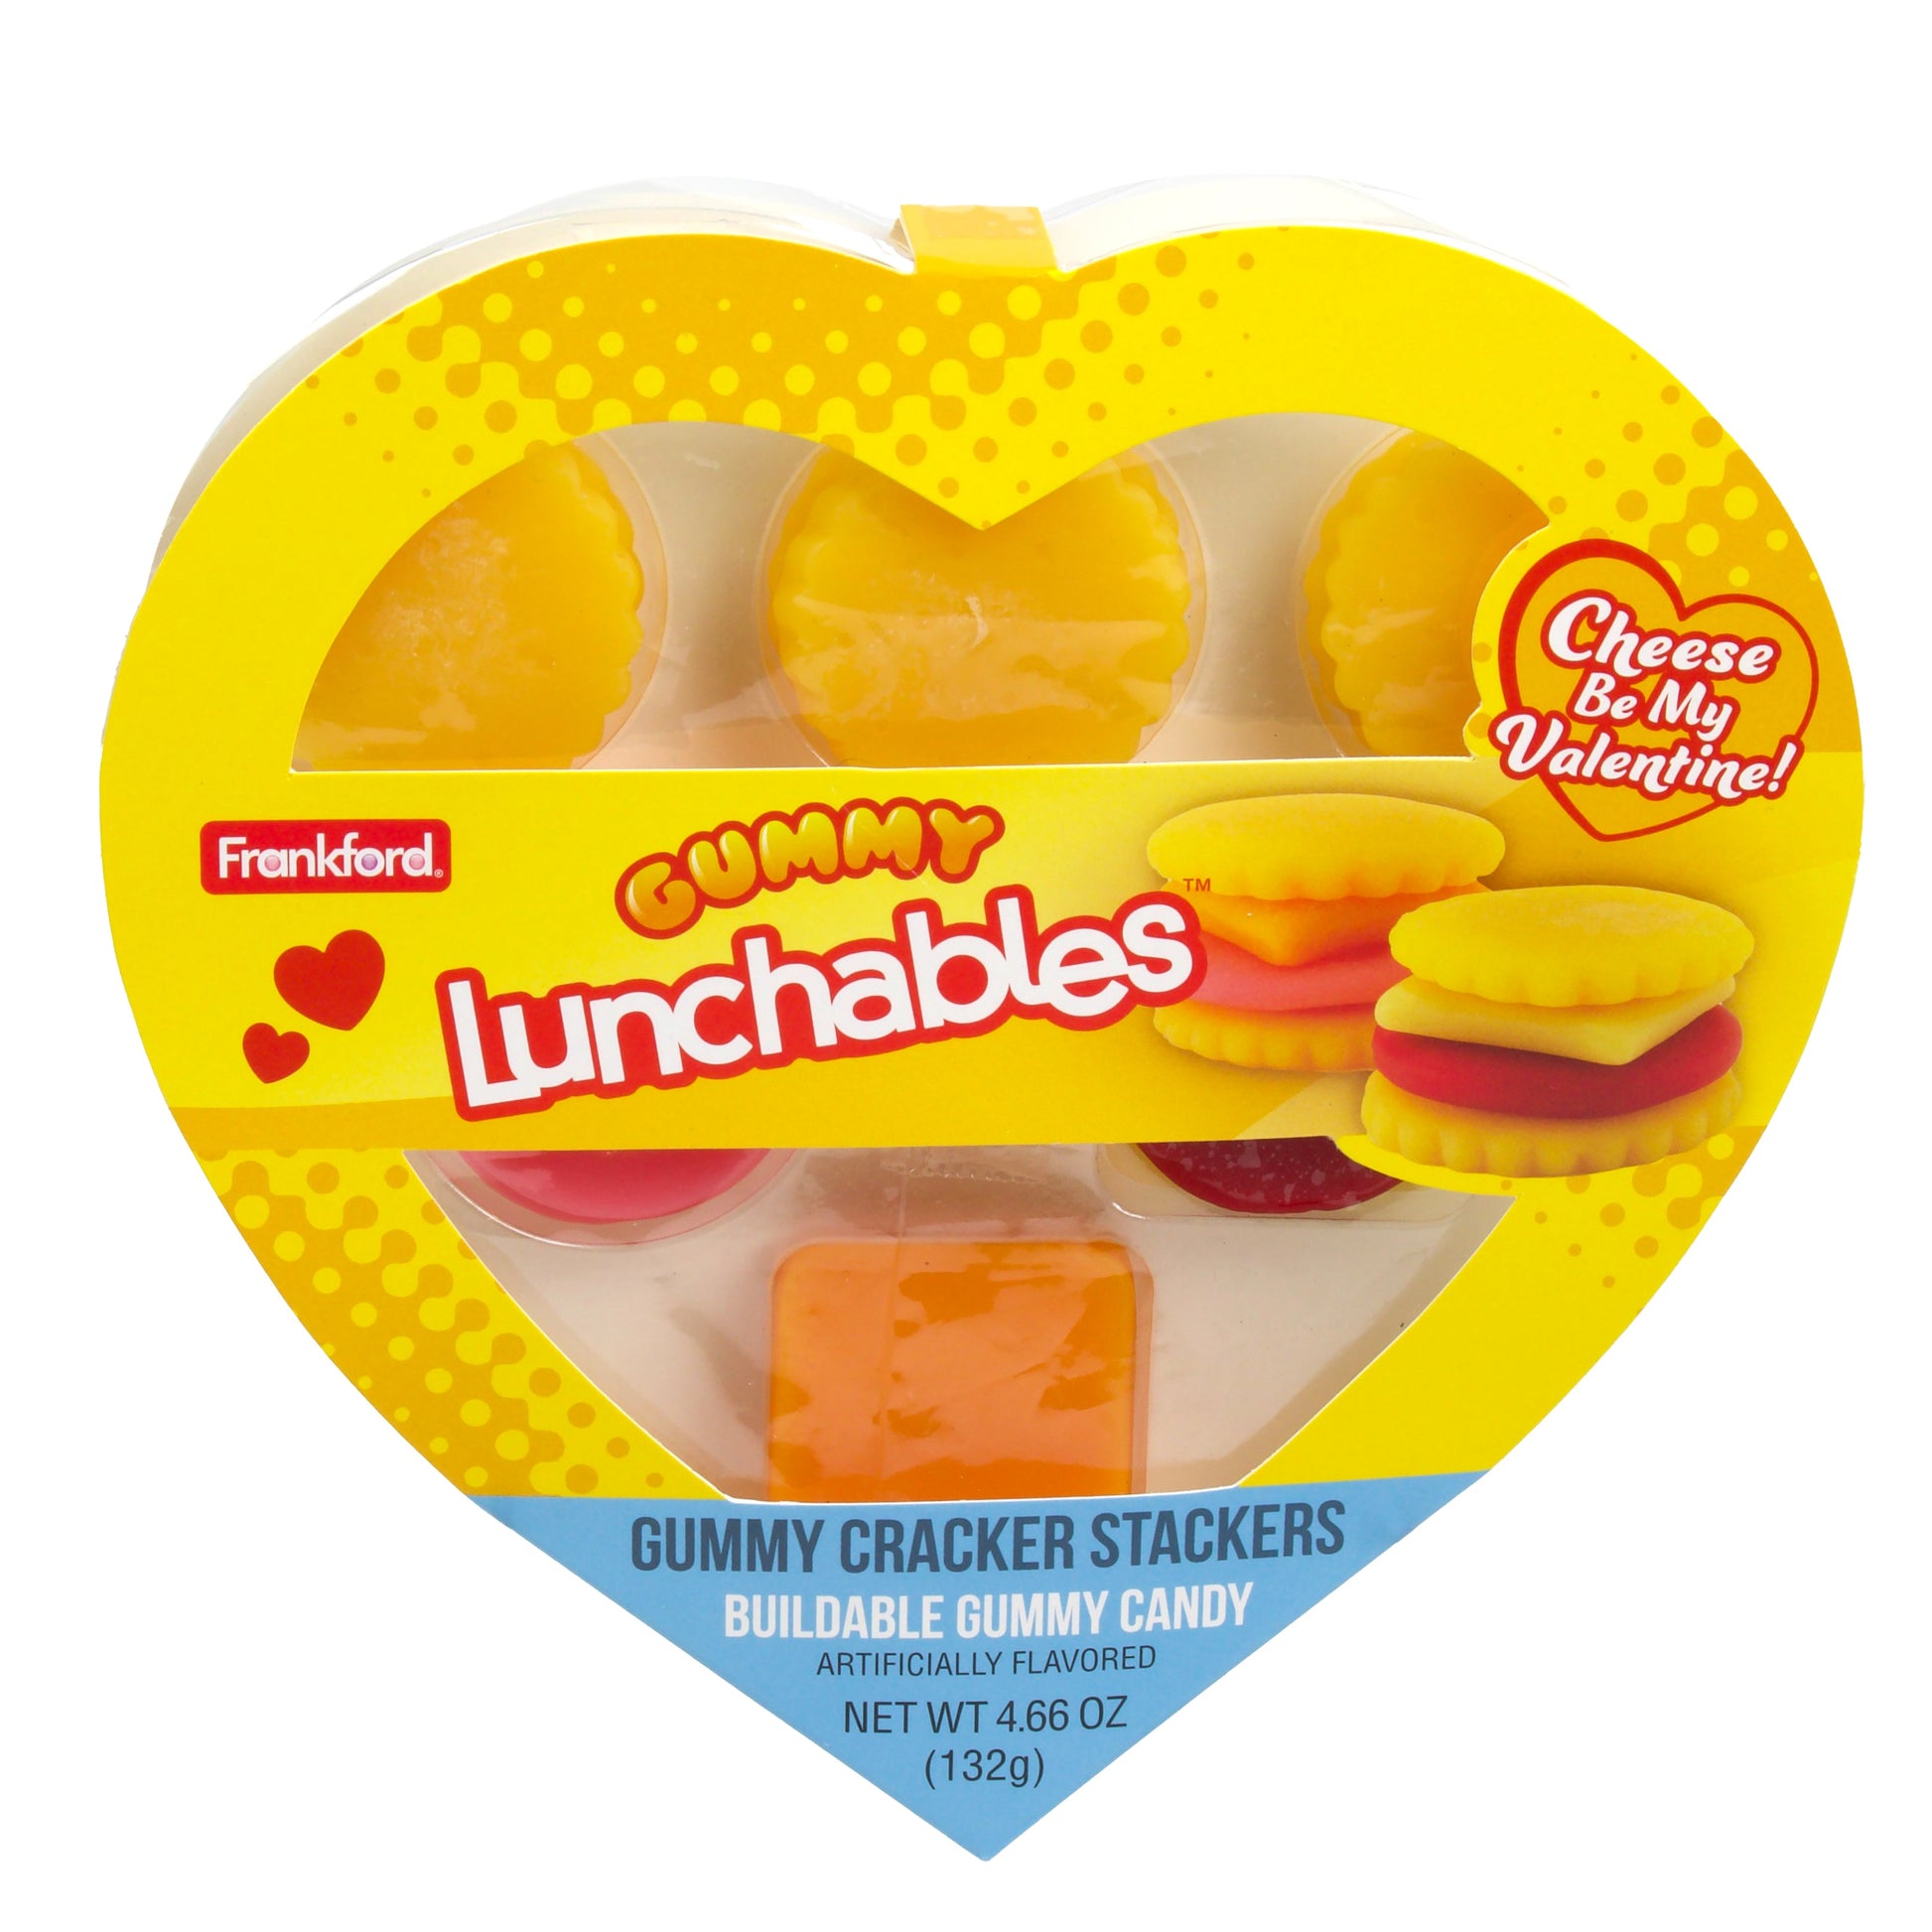 Yellow heart shaped box with gummy crackers and fillings